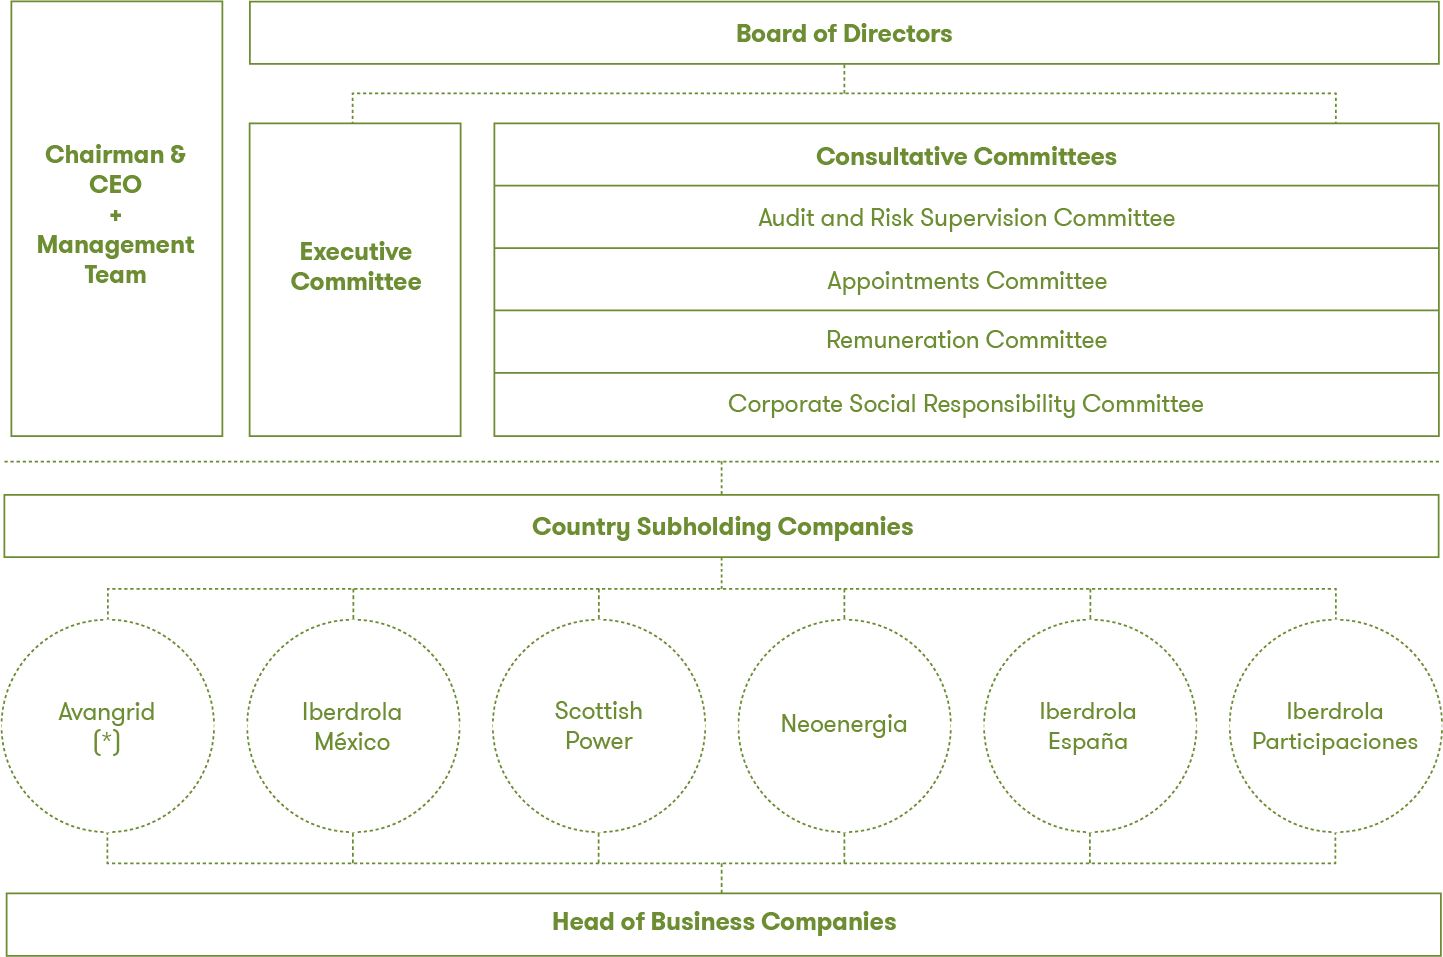 Corporate and governance structure of Iberdrola, S.A.